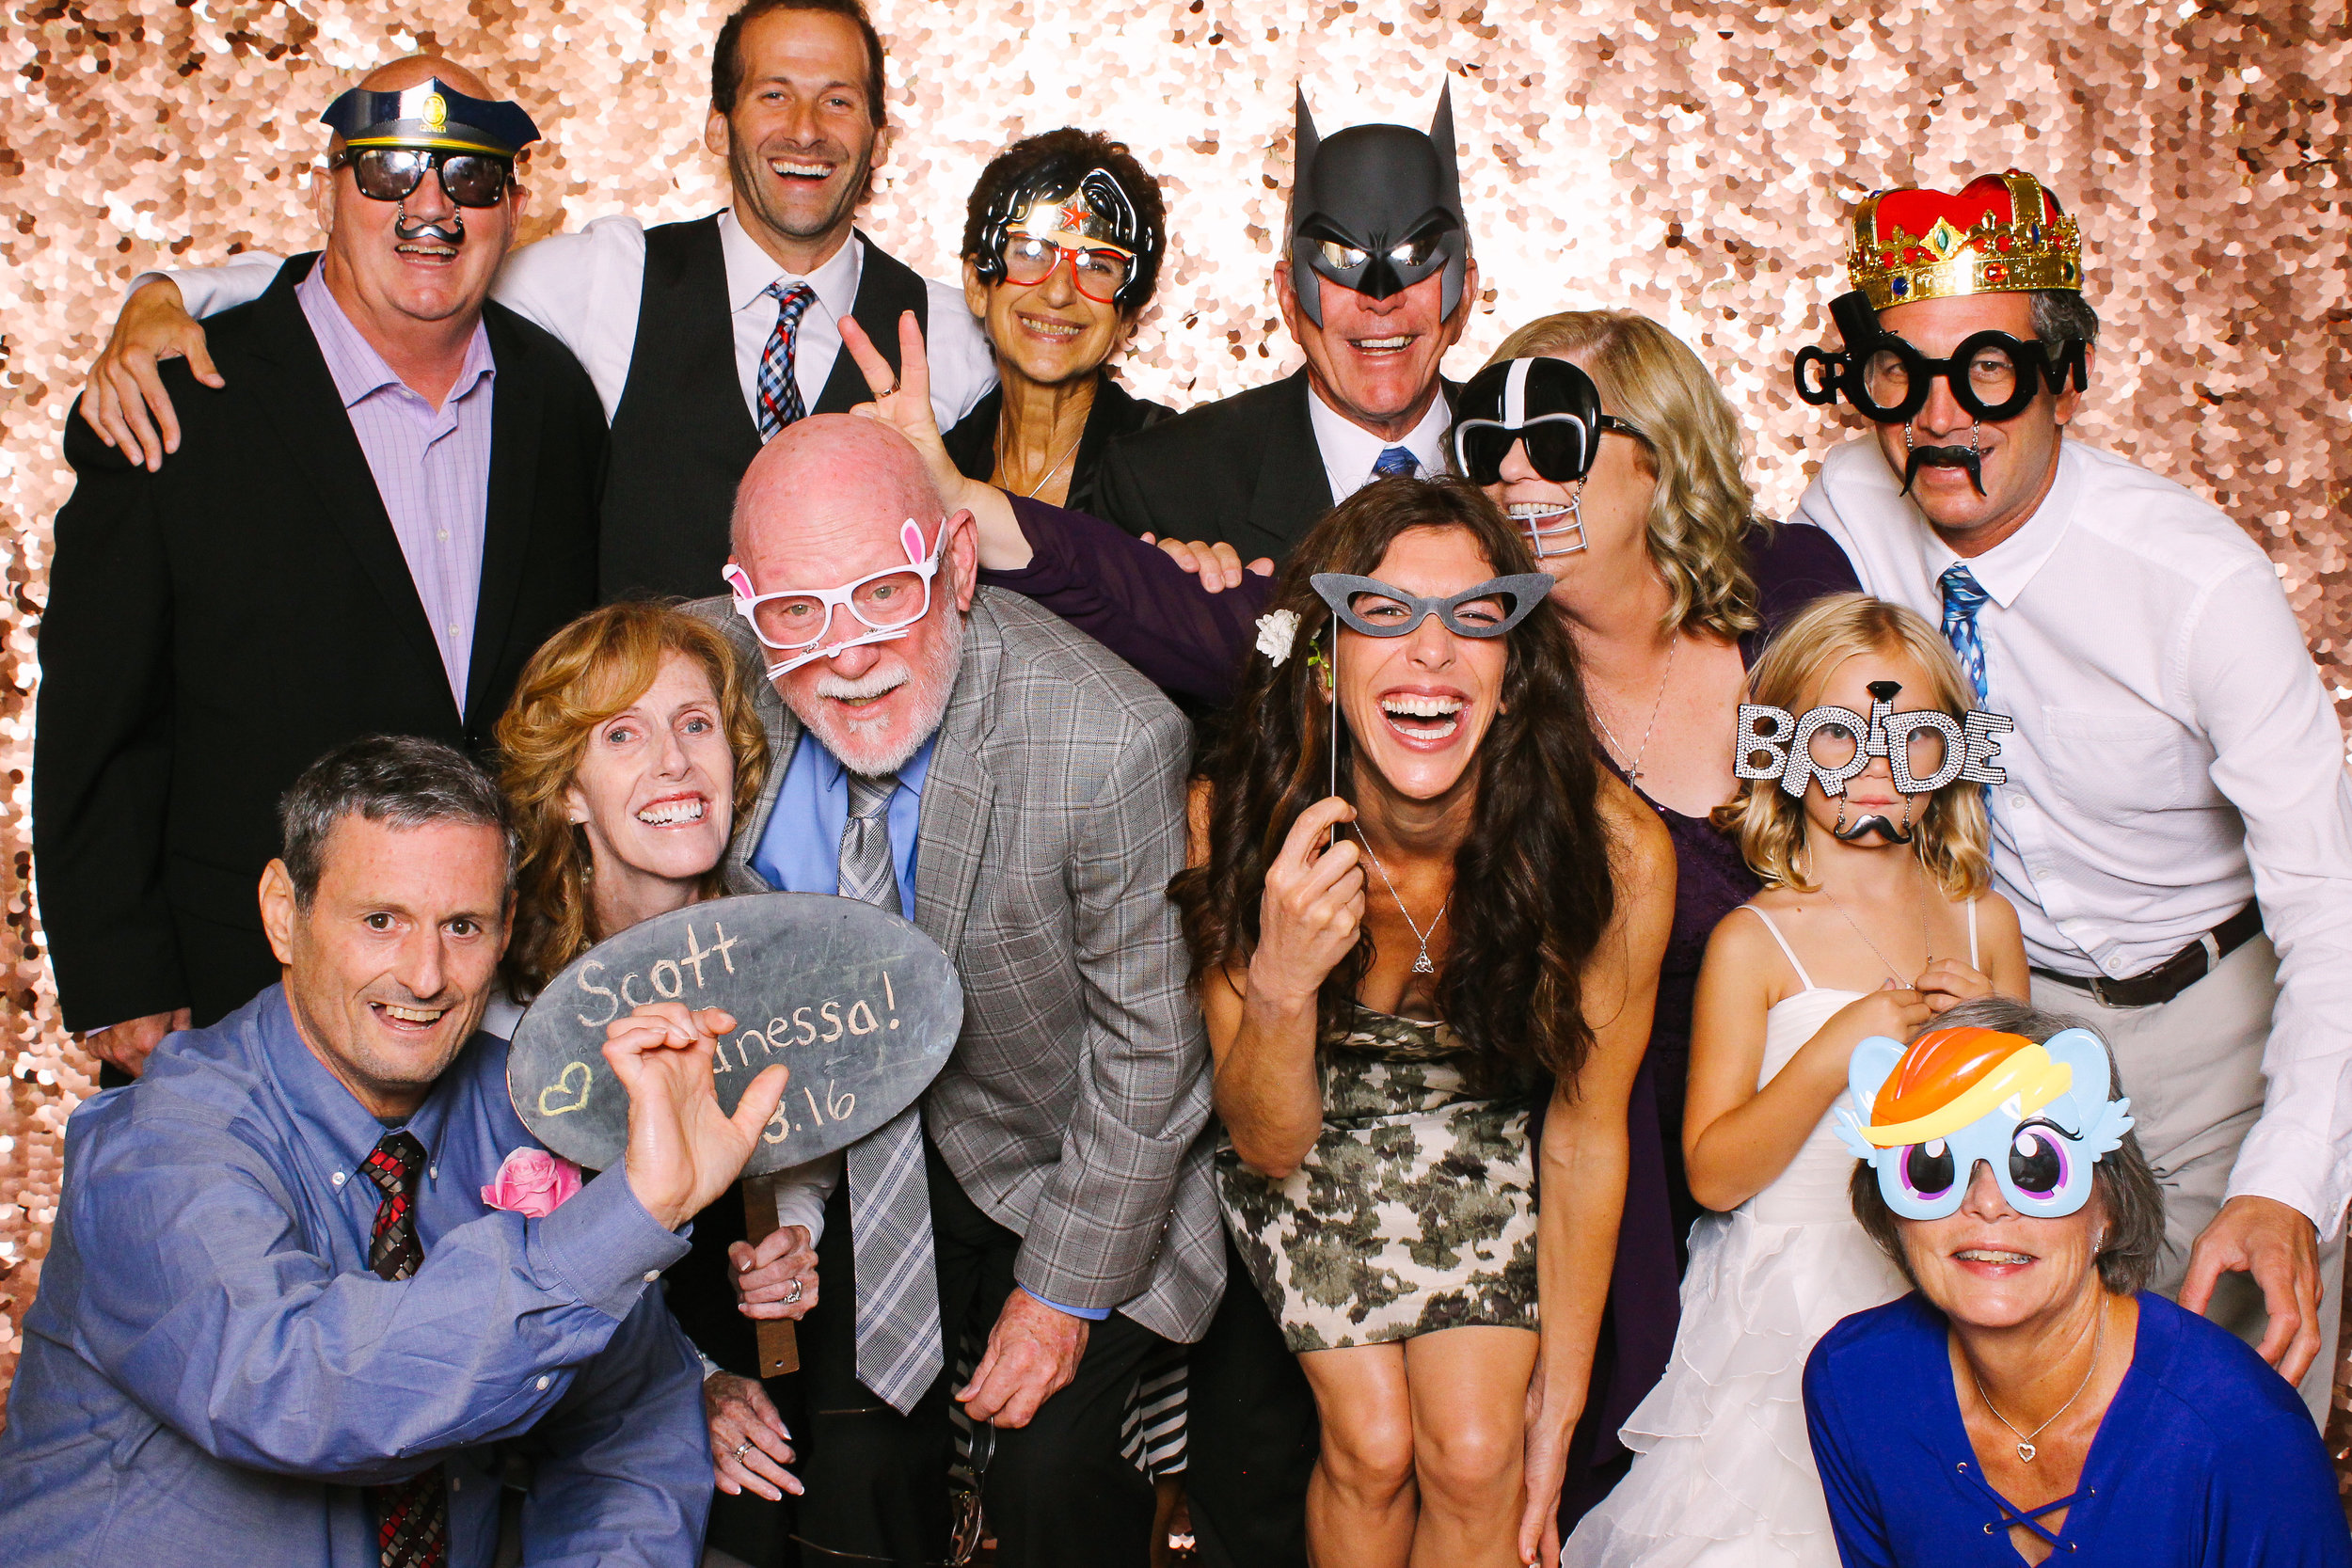 00050-Renaissance Cleveland Hotel Photobooth too much awesomeness -20160903.jpg